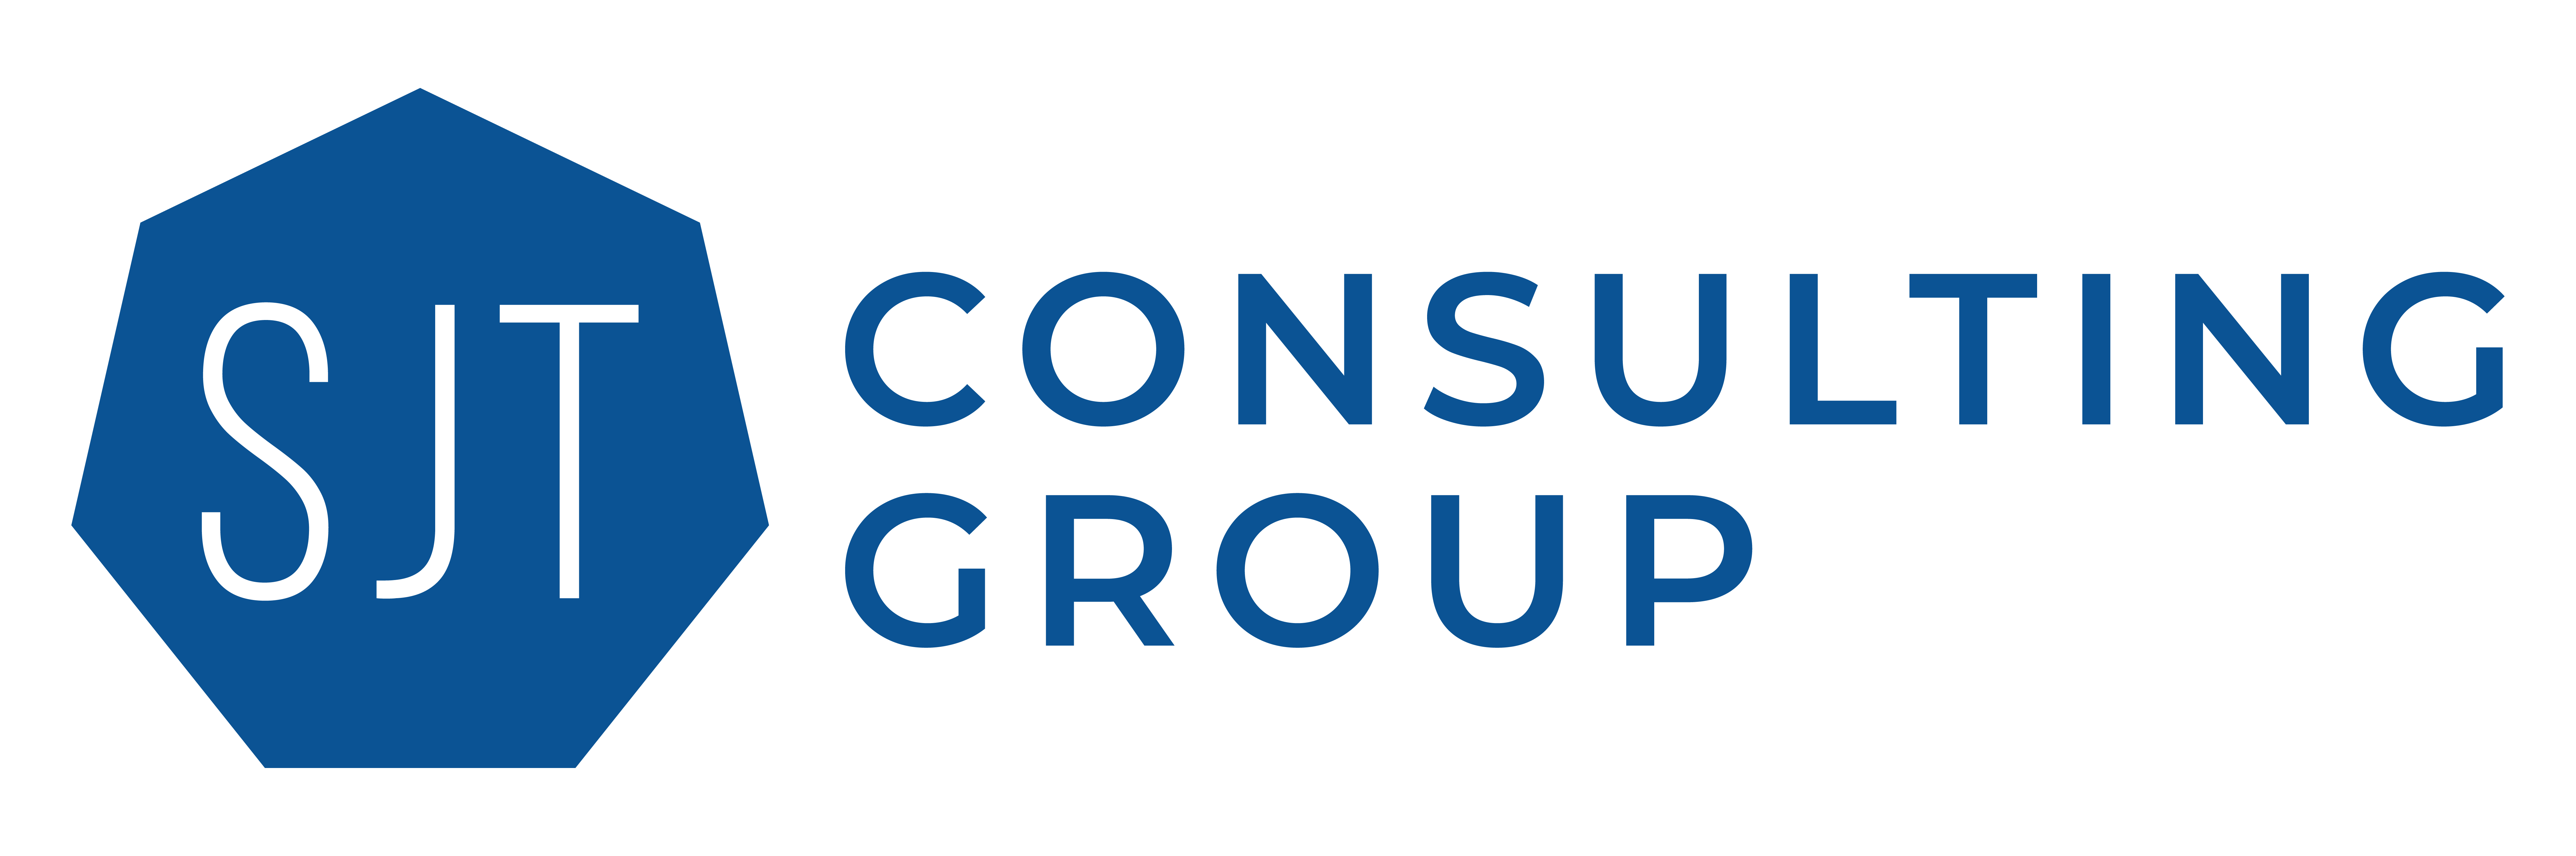 SJT Consulting Group